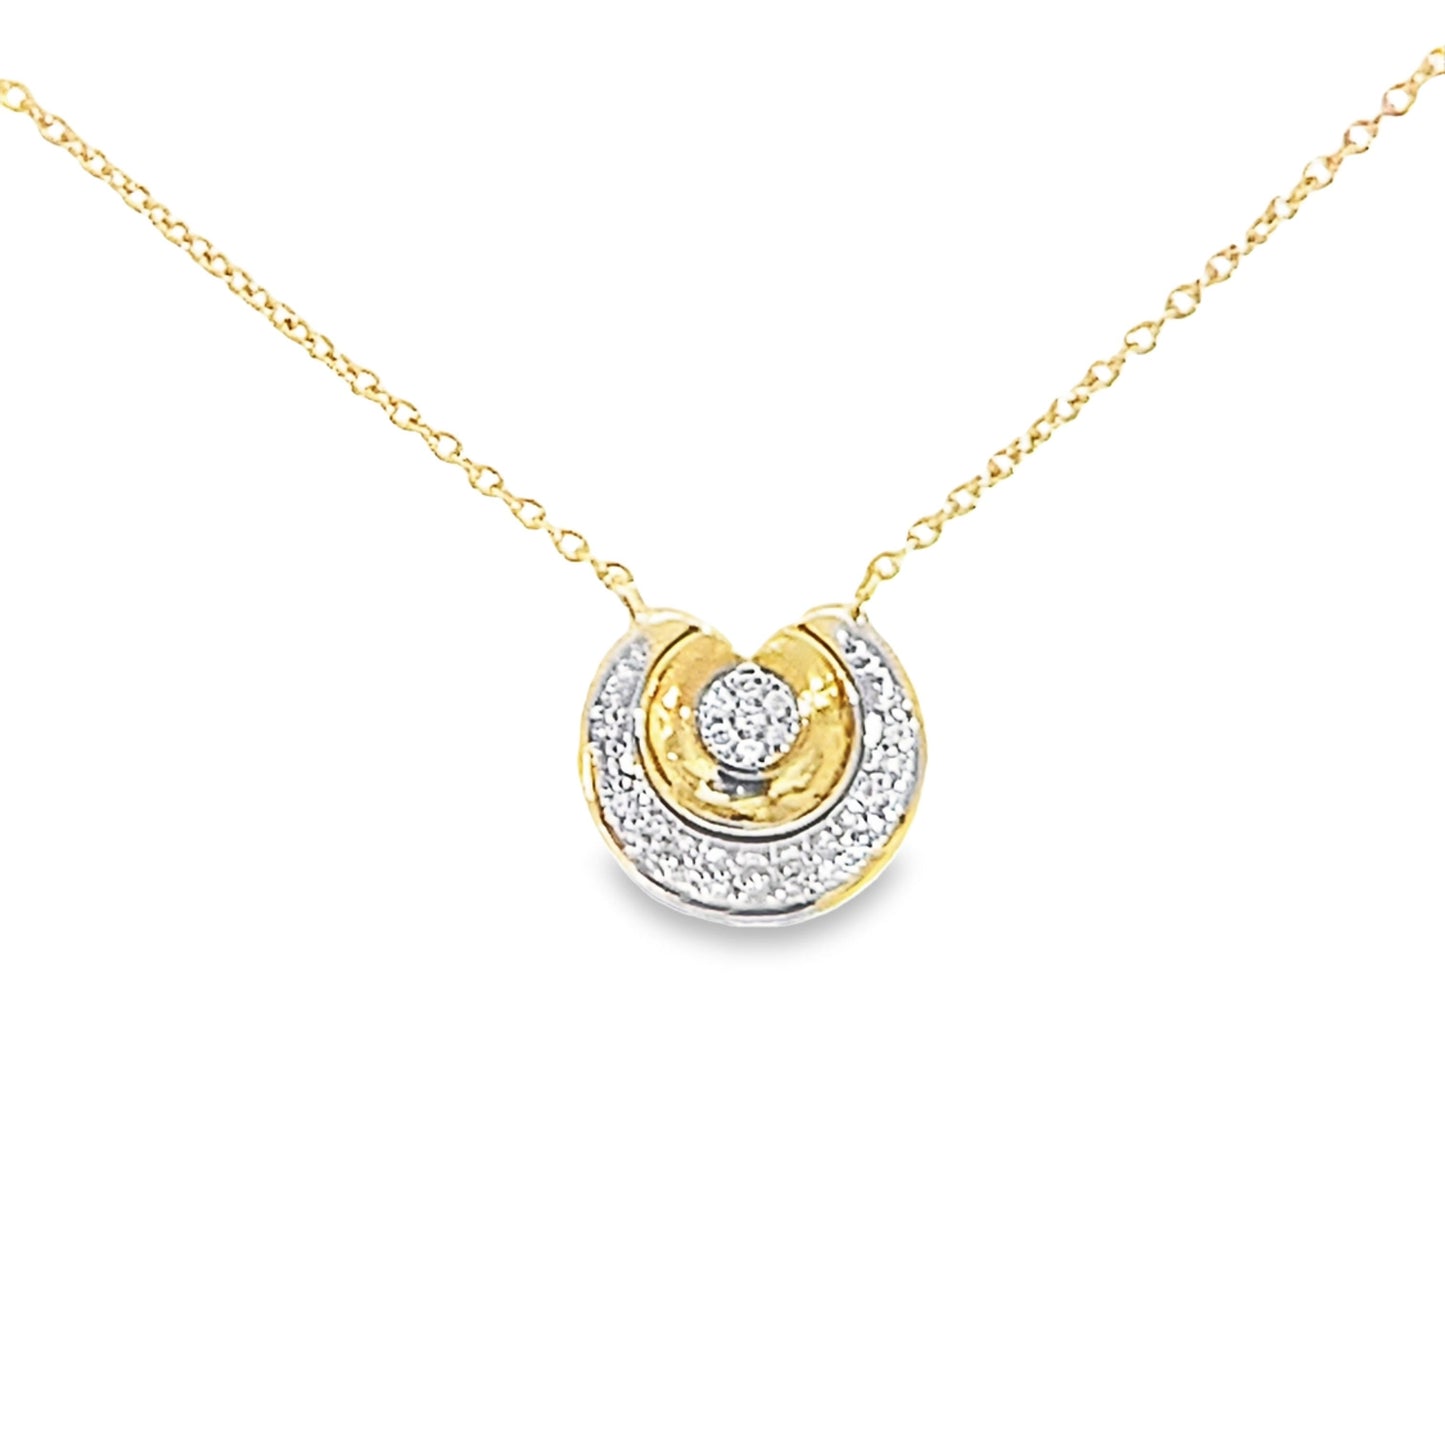 0.15Ctw 10K Yellow Gold Diamond Pear Shaped Pendant Necklace 18in 1.1Dwt